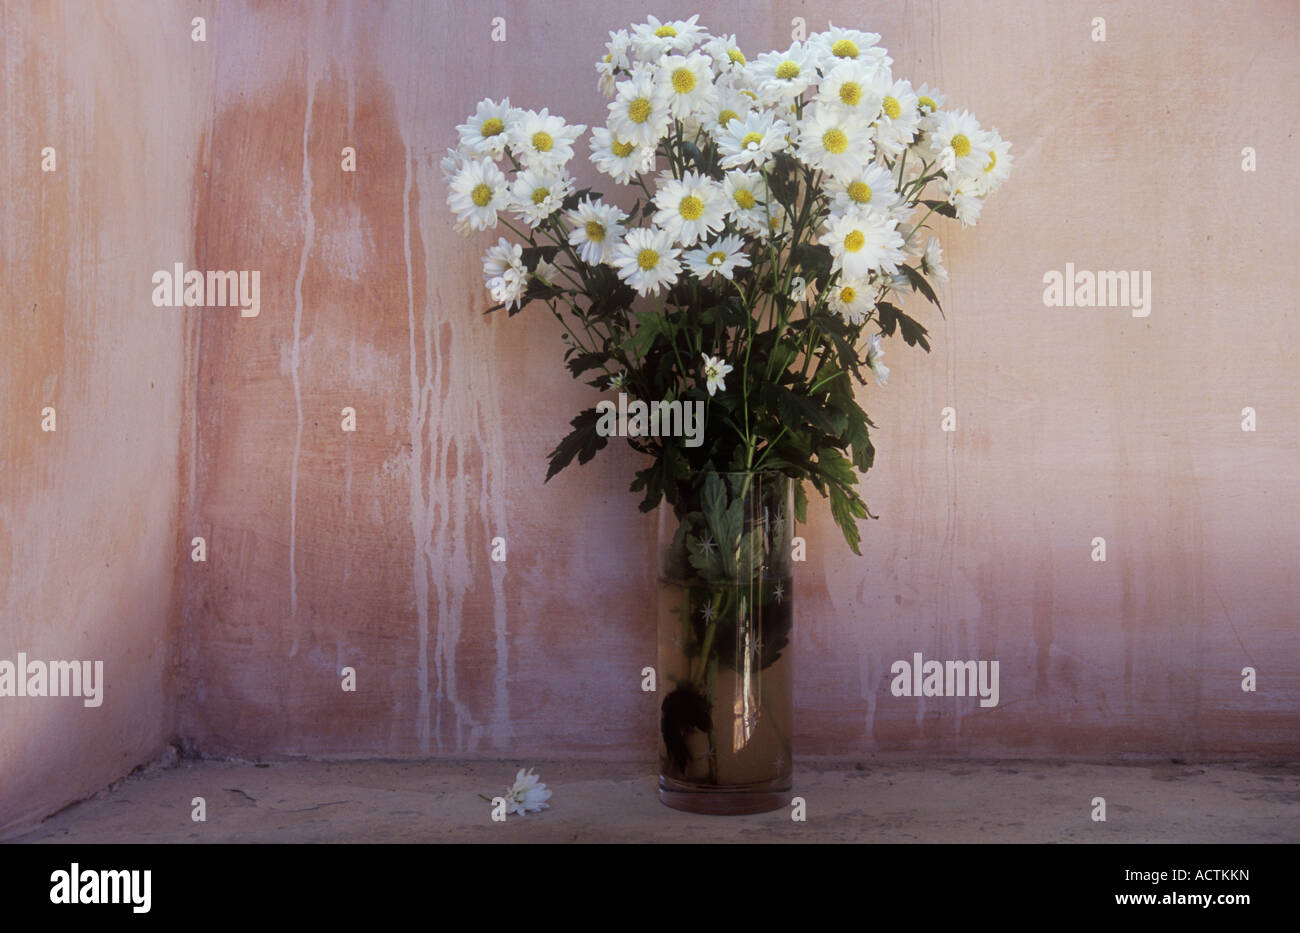 Glass vase on sill with plaster wall painted pink but patchy containing white-petalled yellow-centred Chrysanthemum maximum Stock Photo